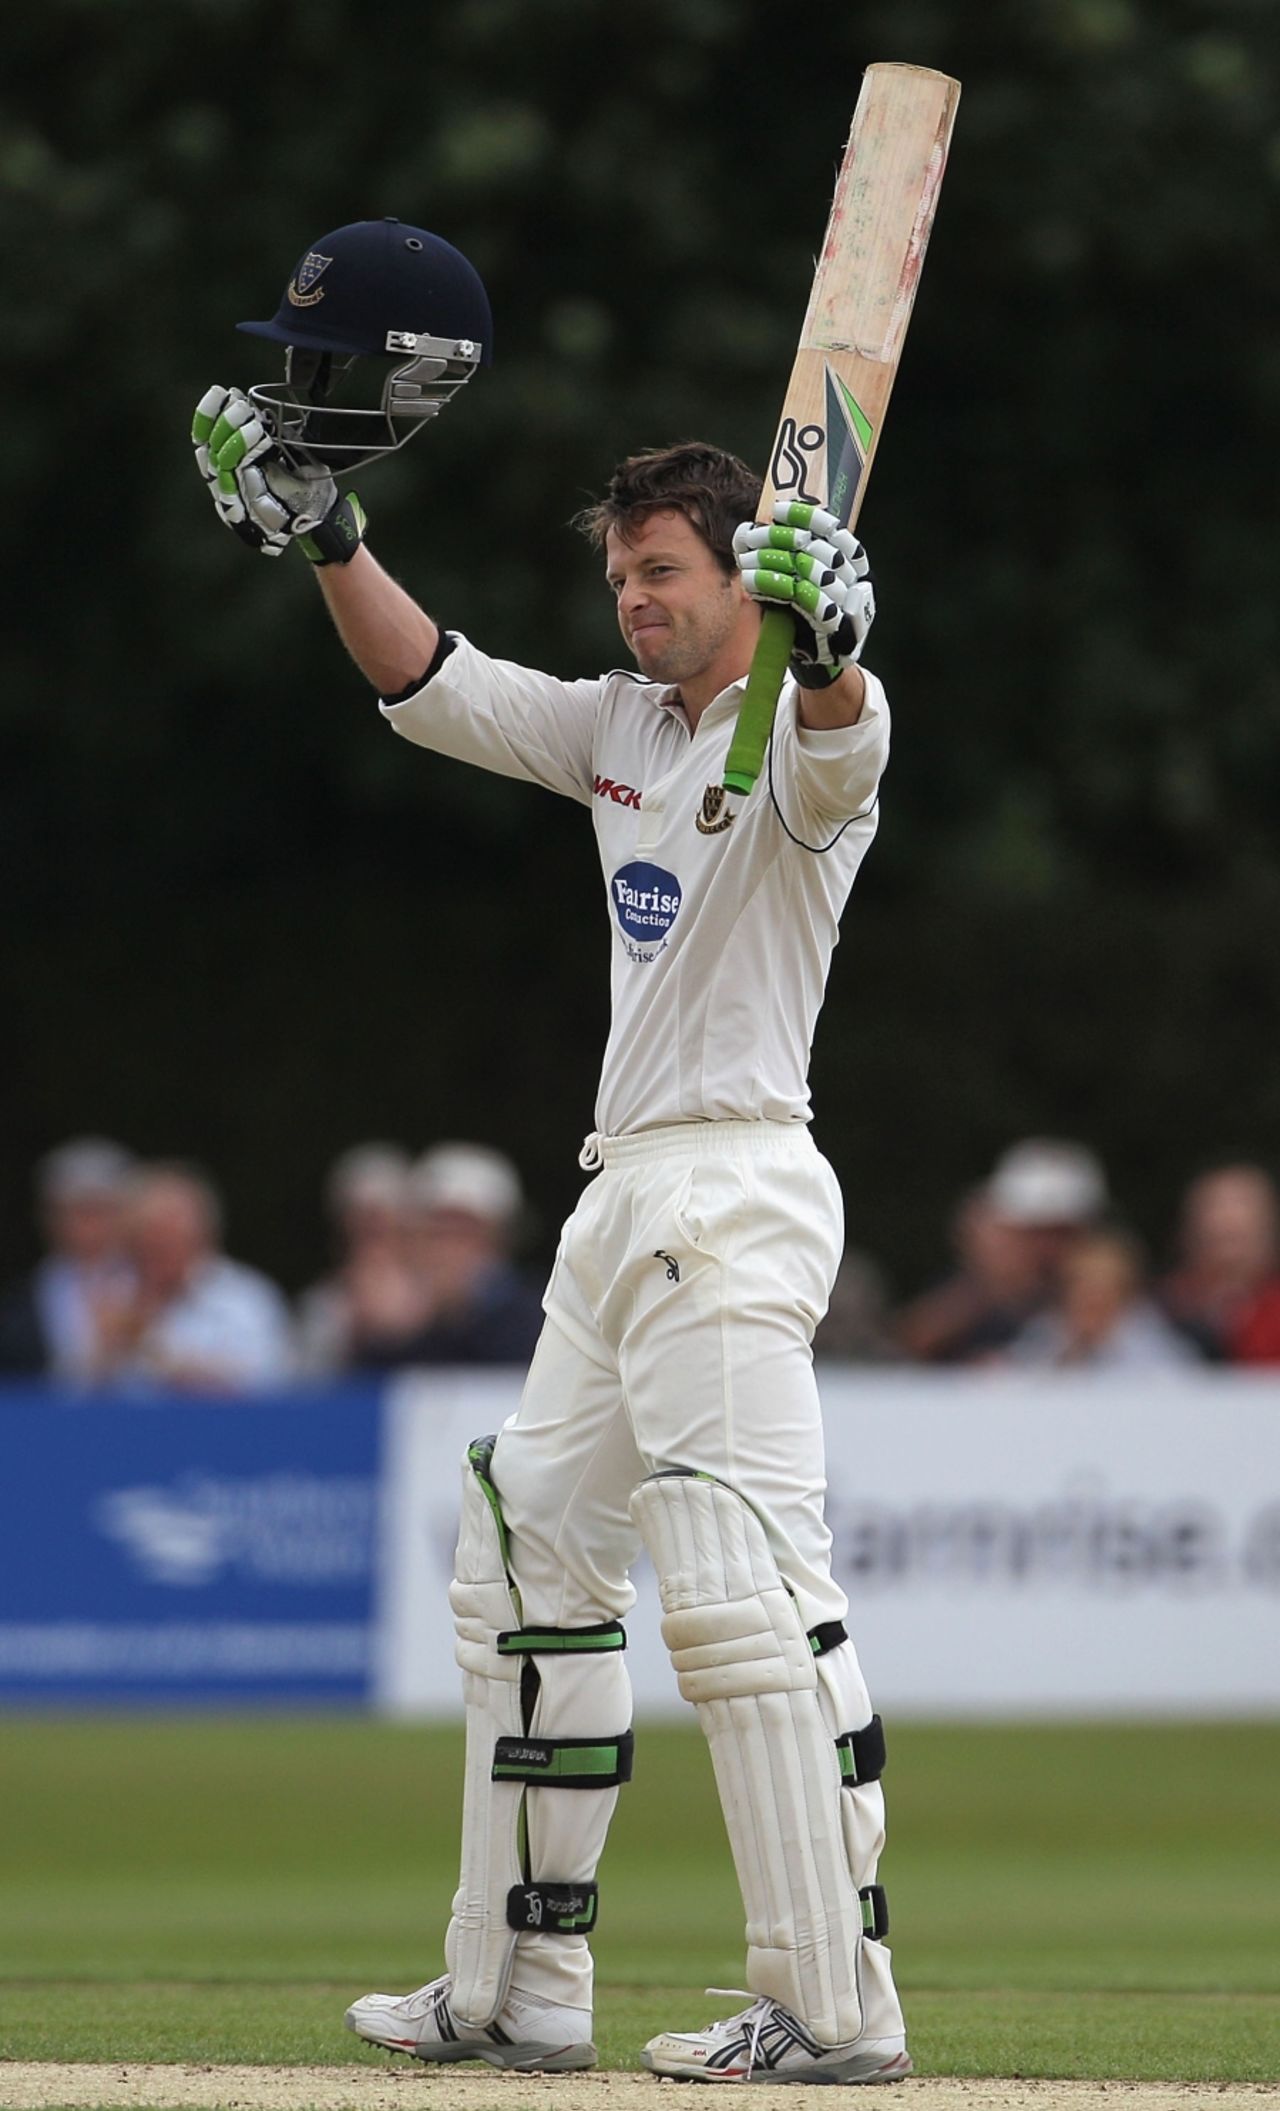 Ed Joyce acknowledges applause for his hundred against Derbyshire, Sussex v Derbyshire, County Championship Division Two, Horsham, August 19 2010